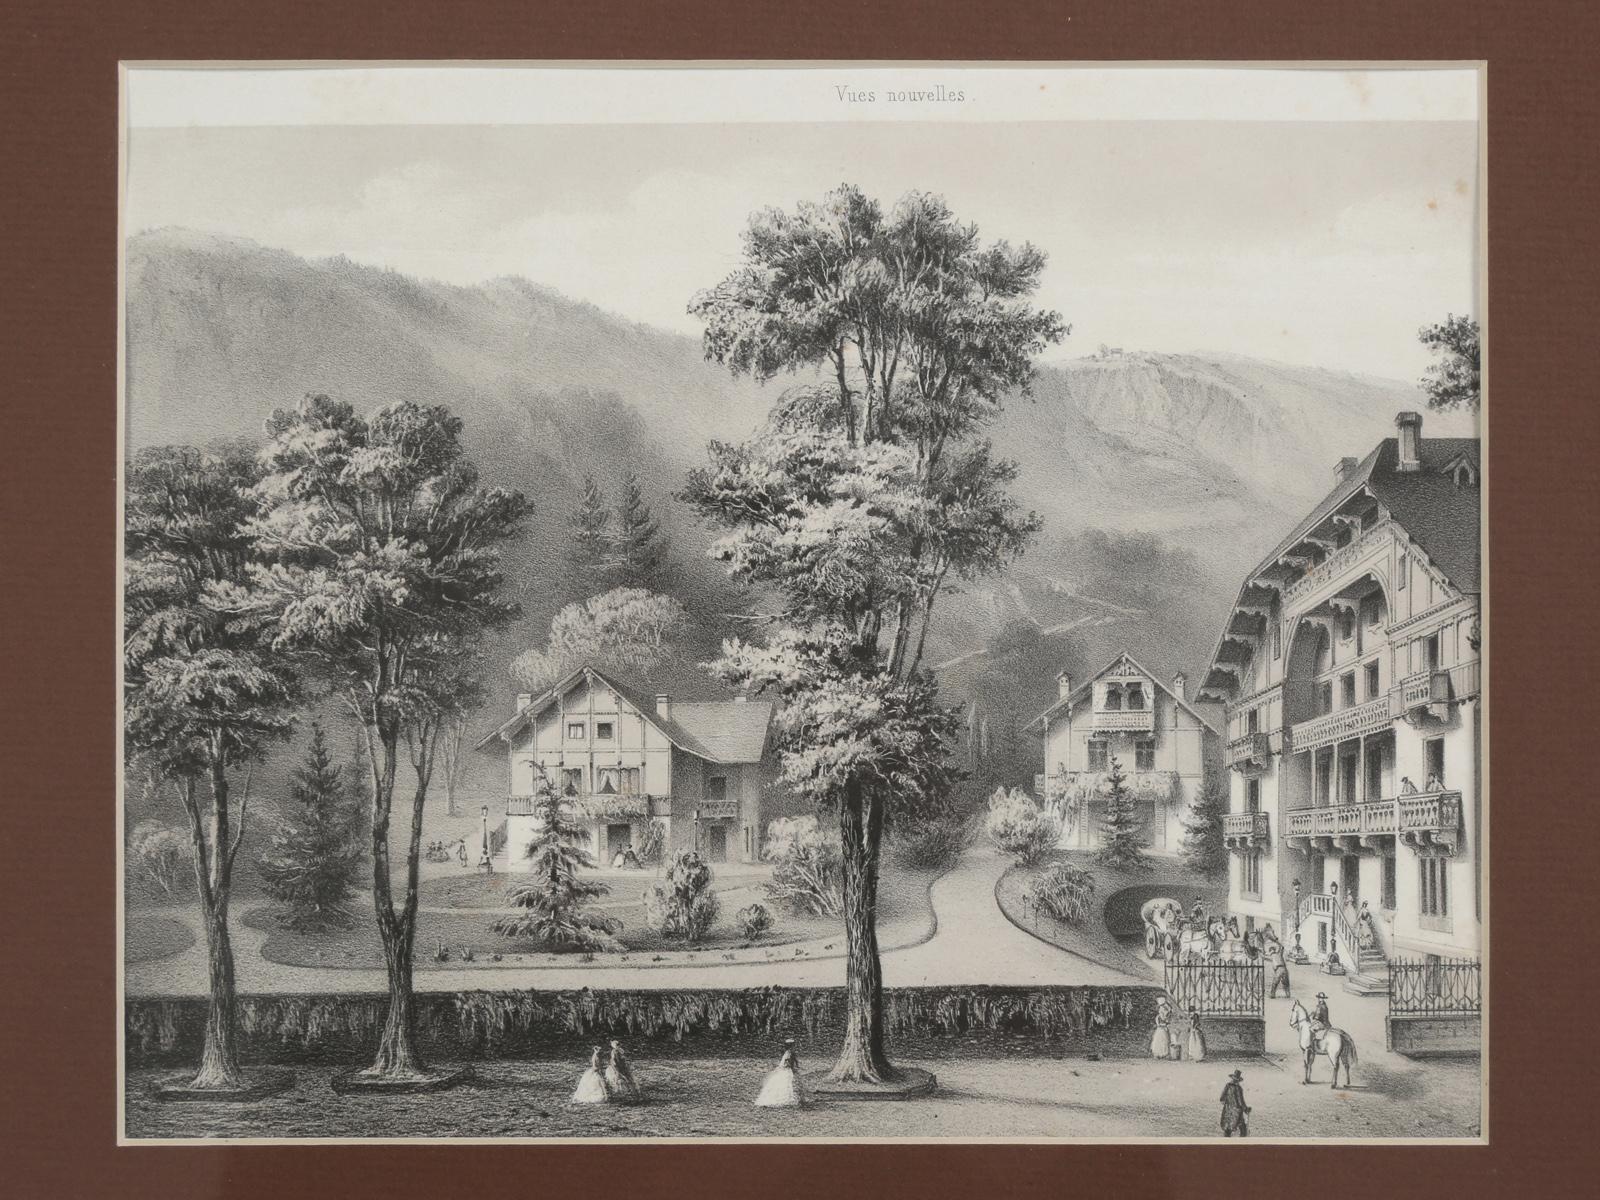 French Title Vues Nouvelles or New Views, Black Forest Village Scene, circa 1800s